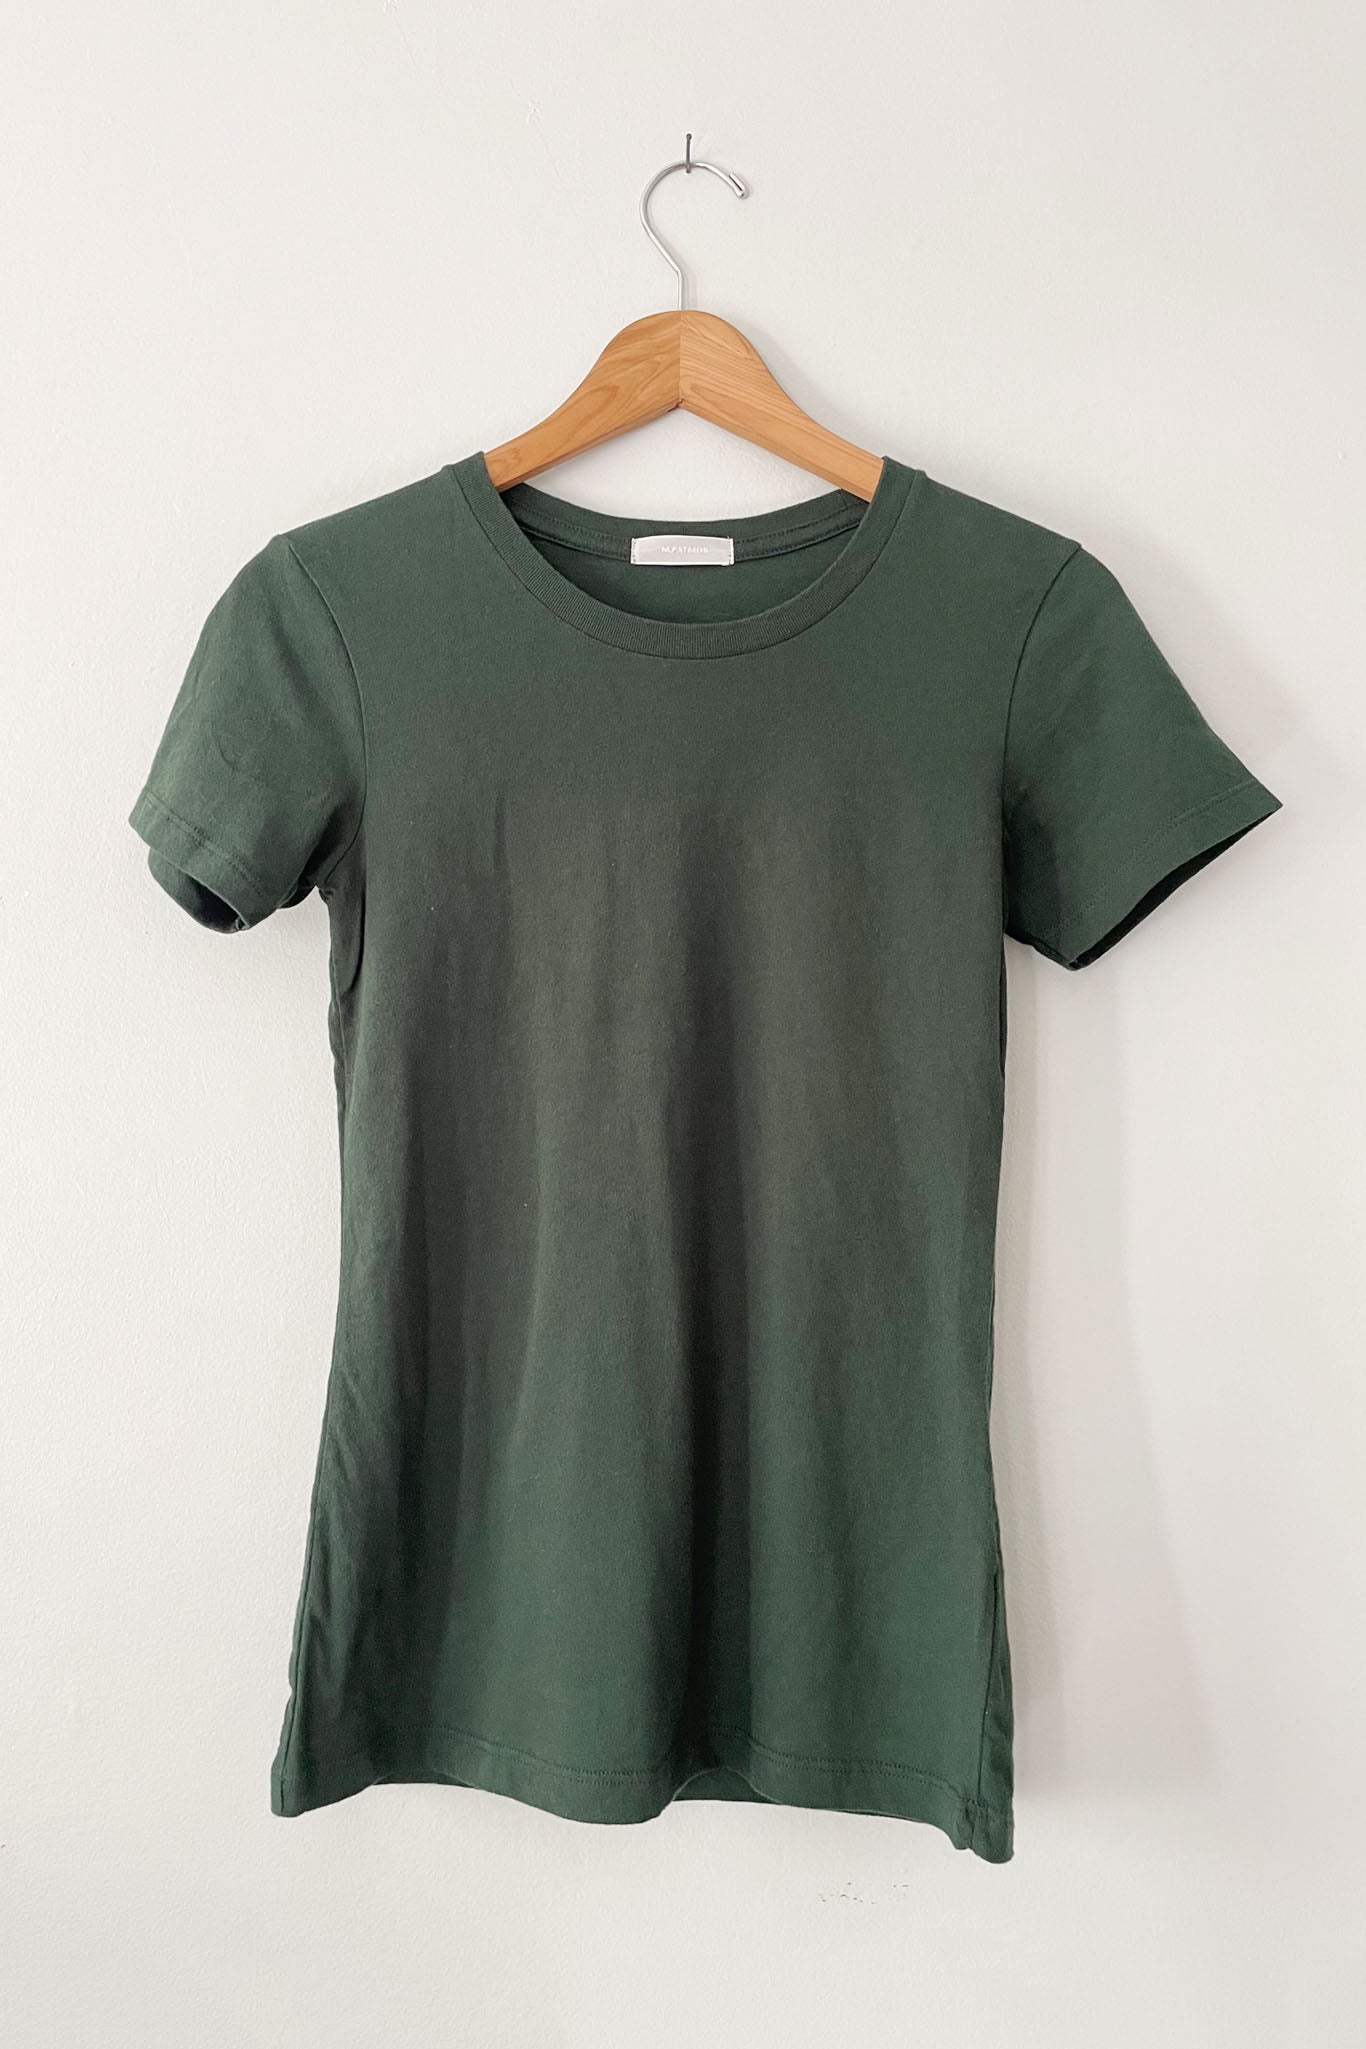 Easy Cotton crewneck tee shirt perfect for summer.